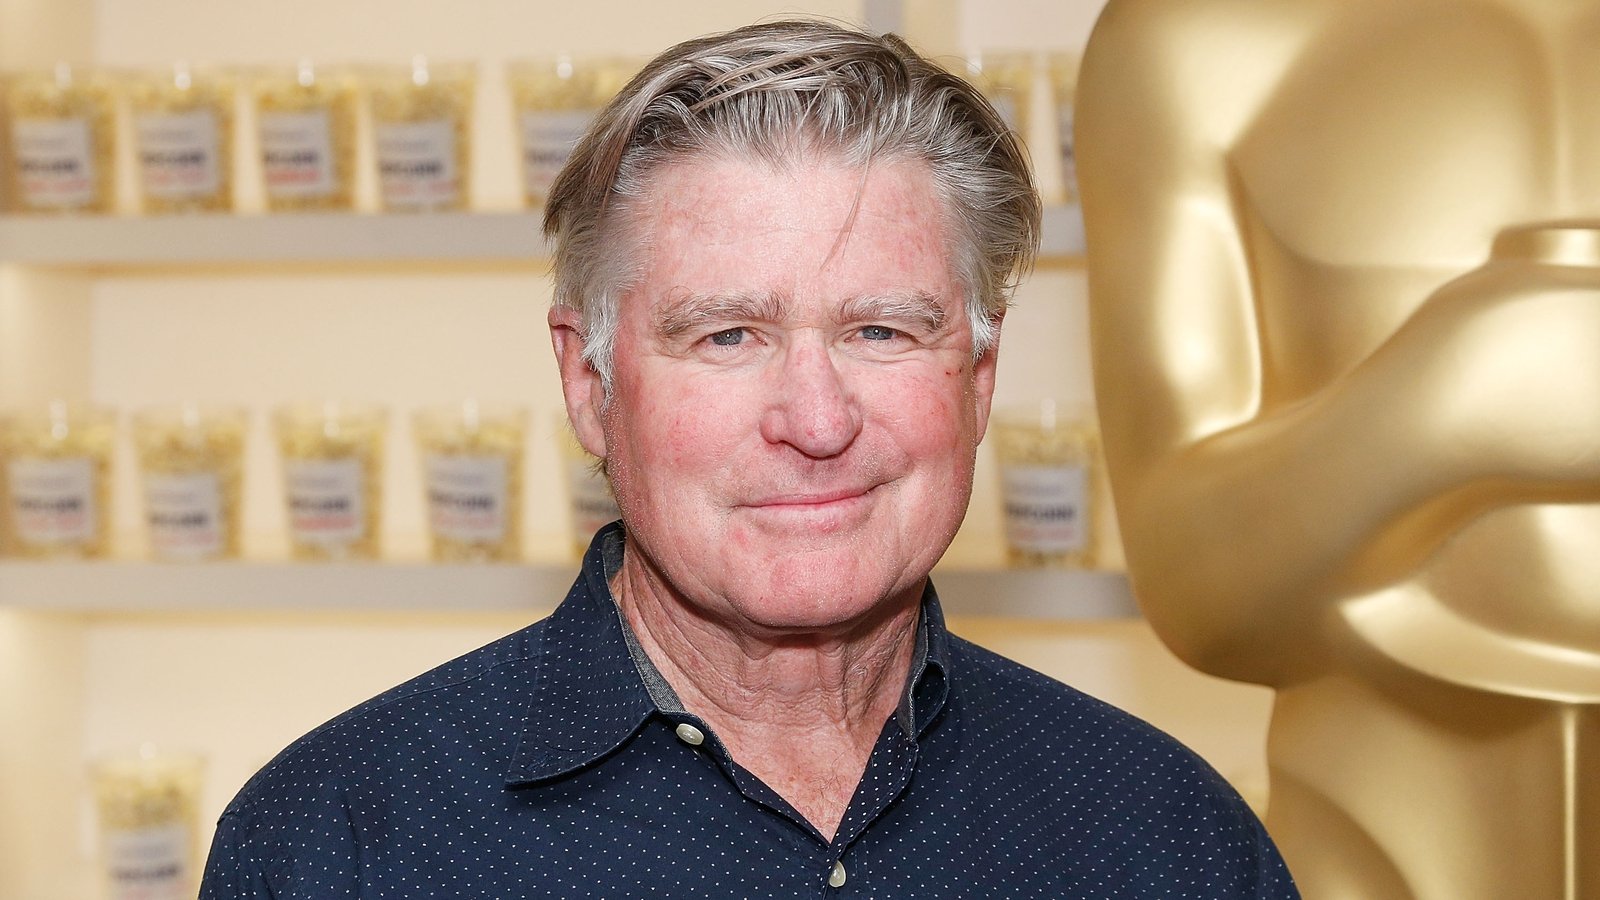 Treat Williams Death: The Actor's Family Express Their Shock Over His Death  In A Fatal Motorcycle Accident, We Are Beyond Devastated